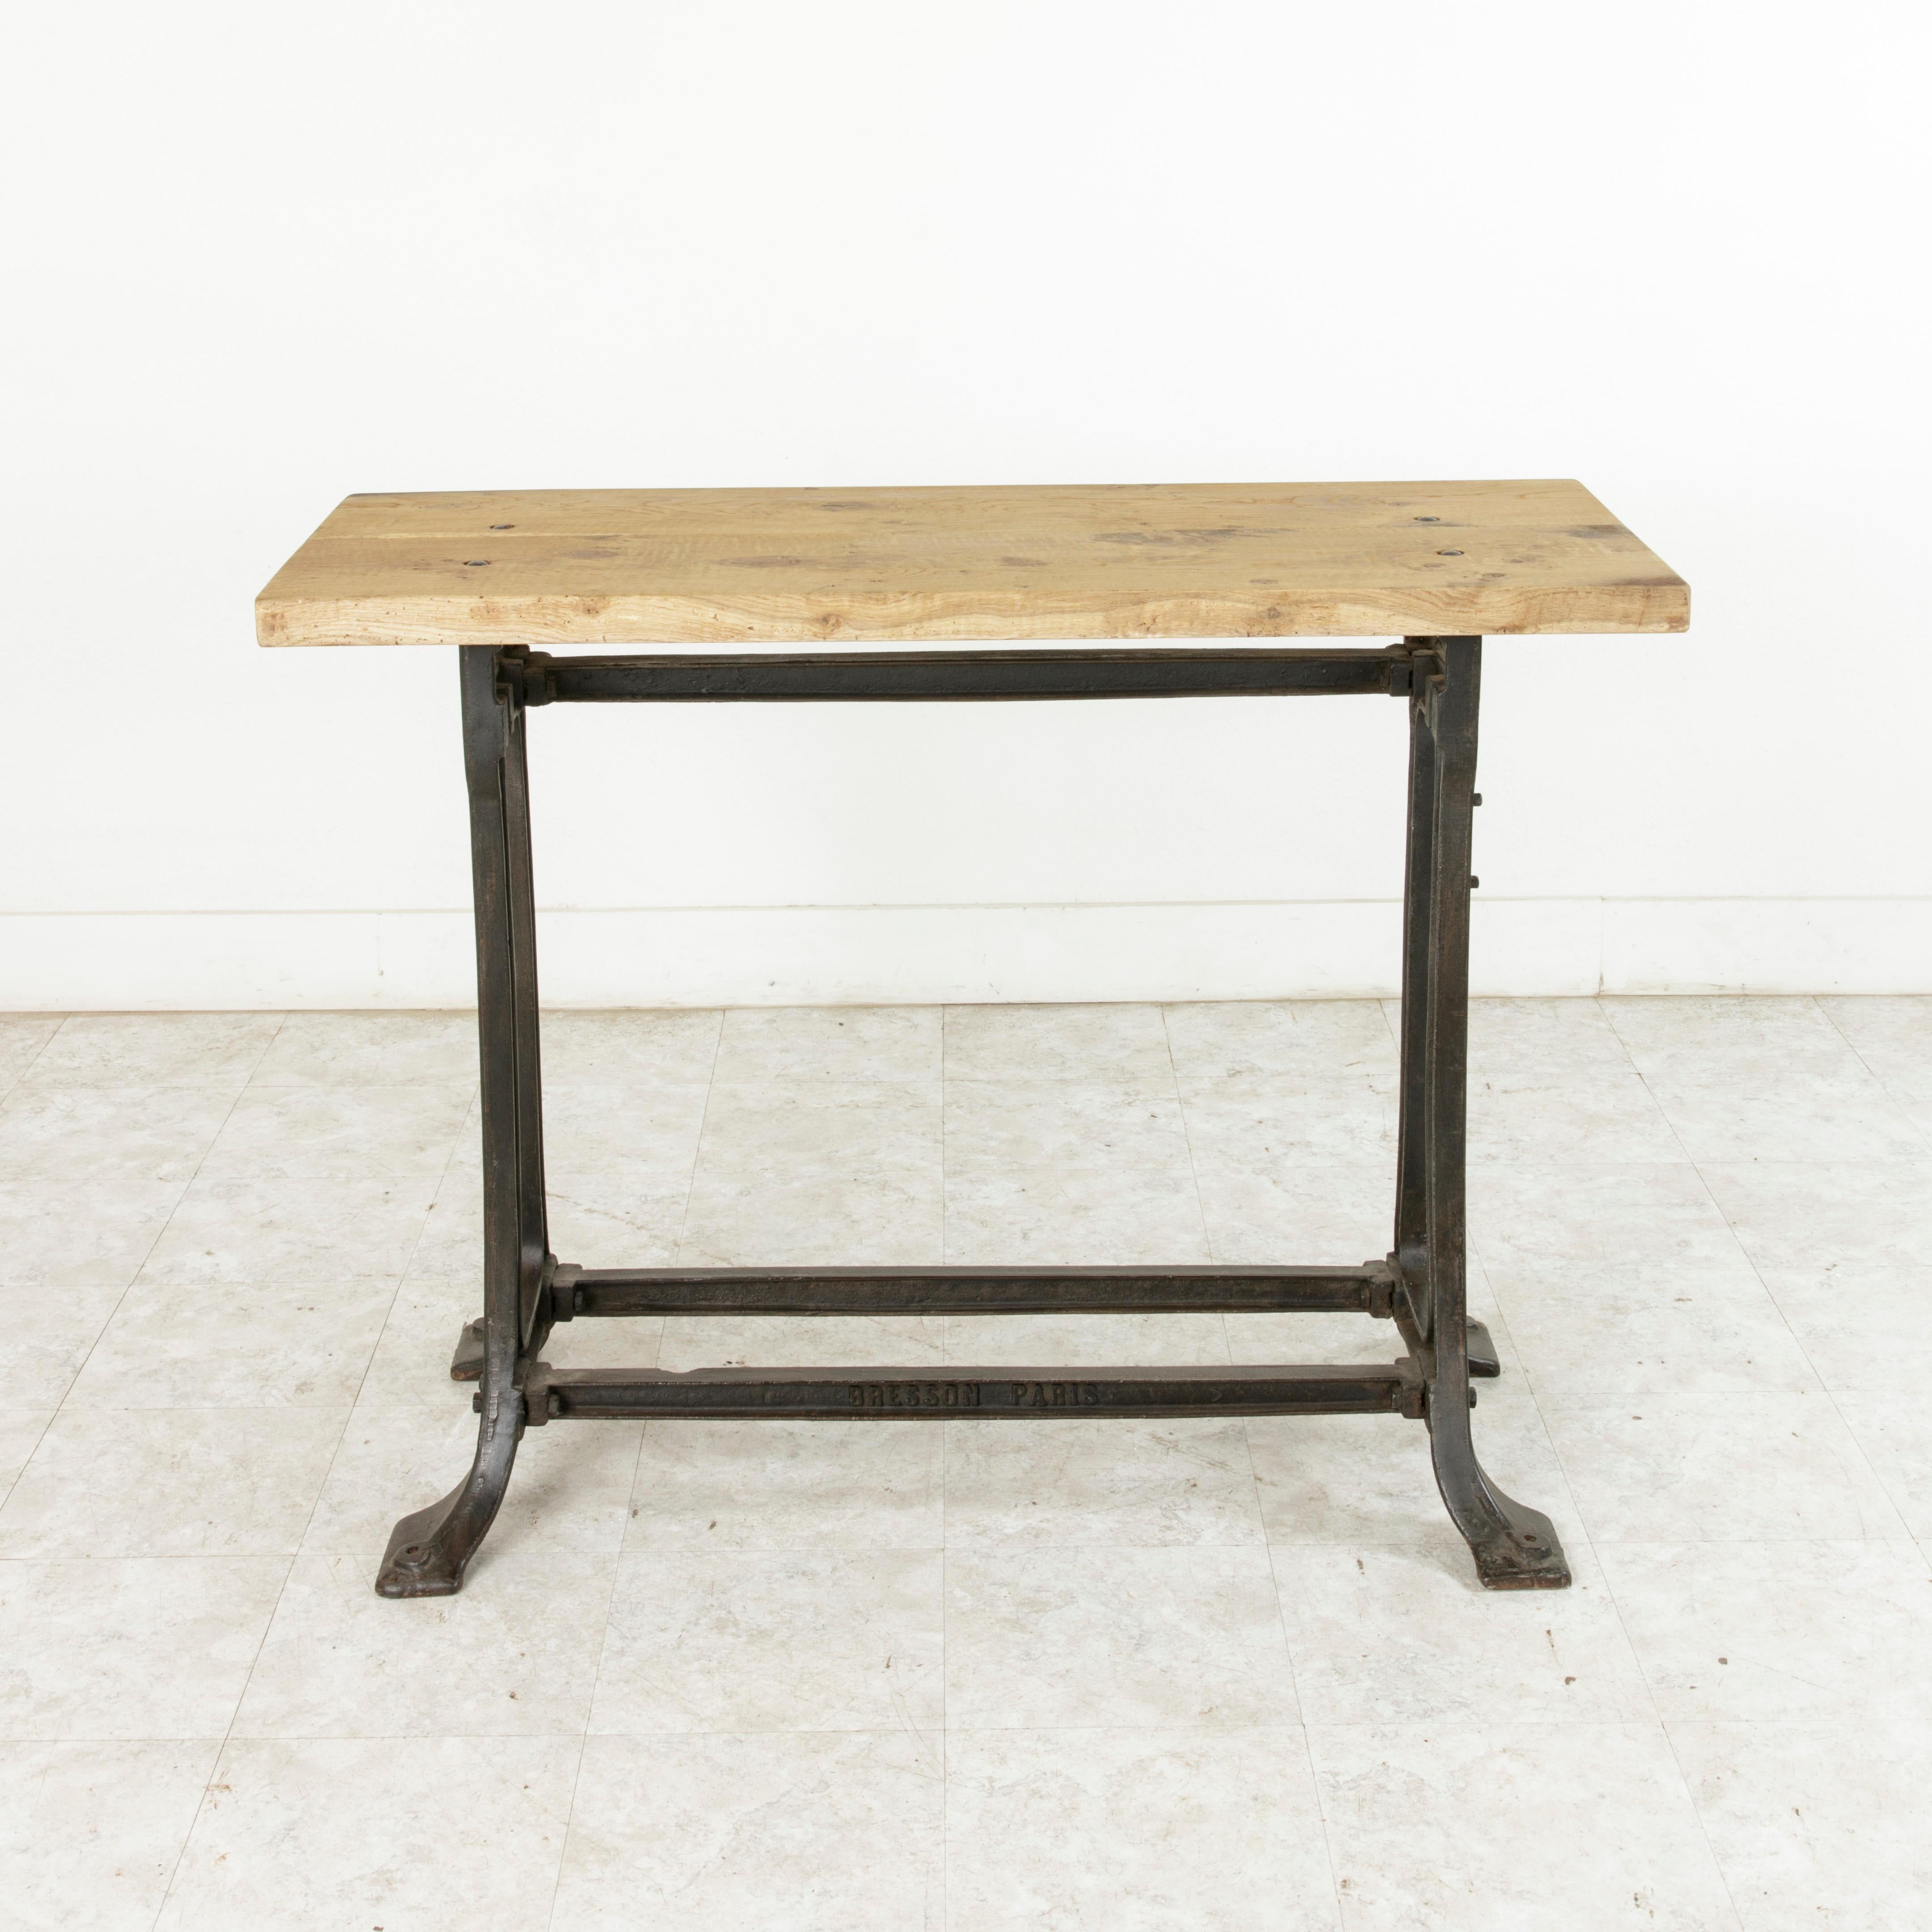 This early 20th century French Industrial console table or work table stands at 36.5 inches in height and features a two inch thick oak top constructed of two planks of wood joined by a spline that runs the length of the tabletop. The top rests on a